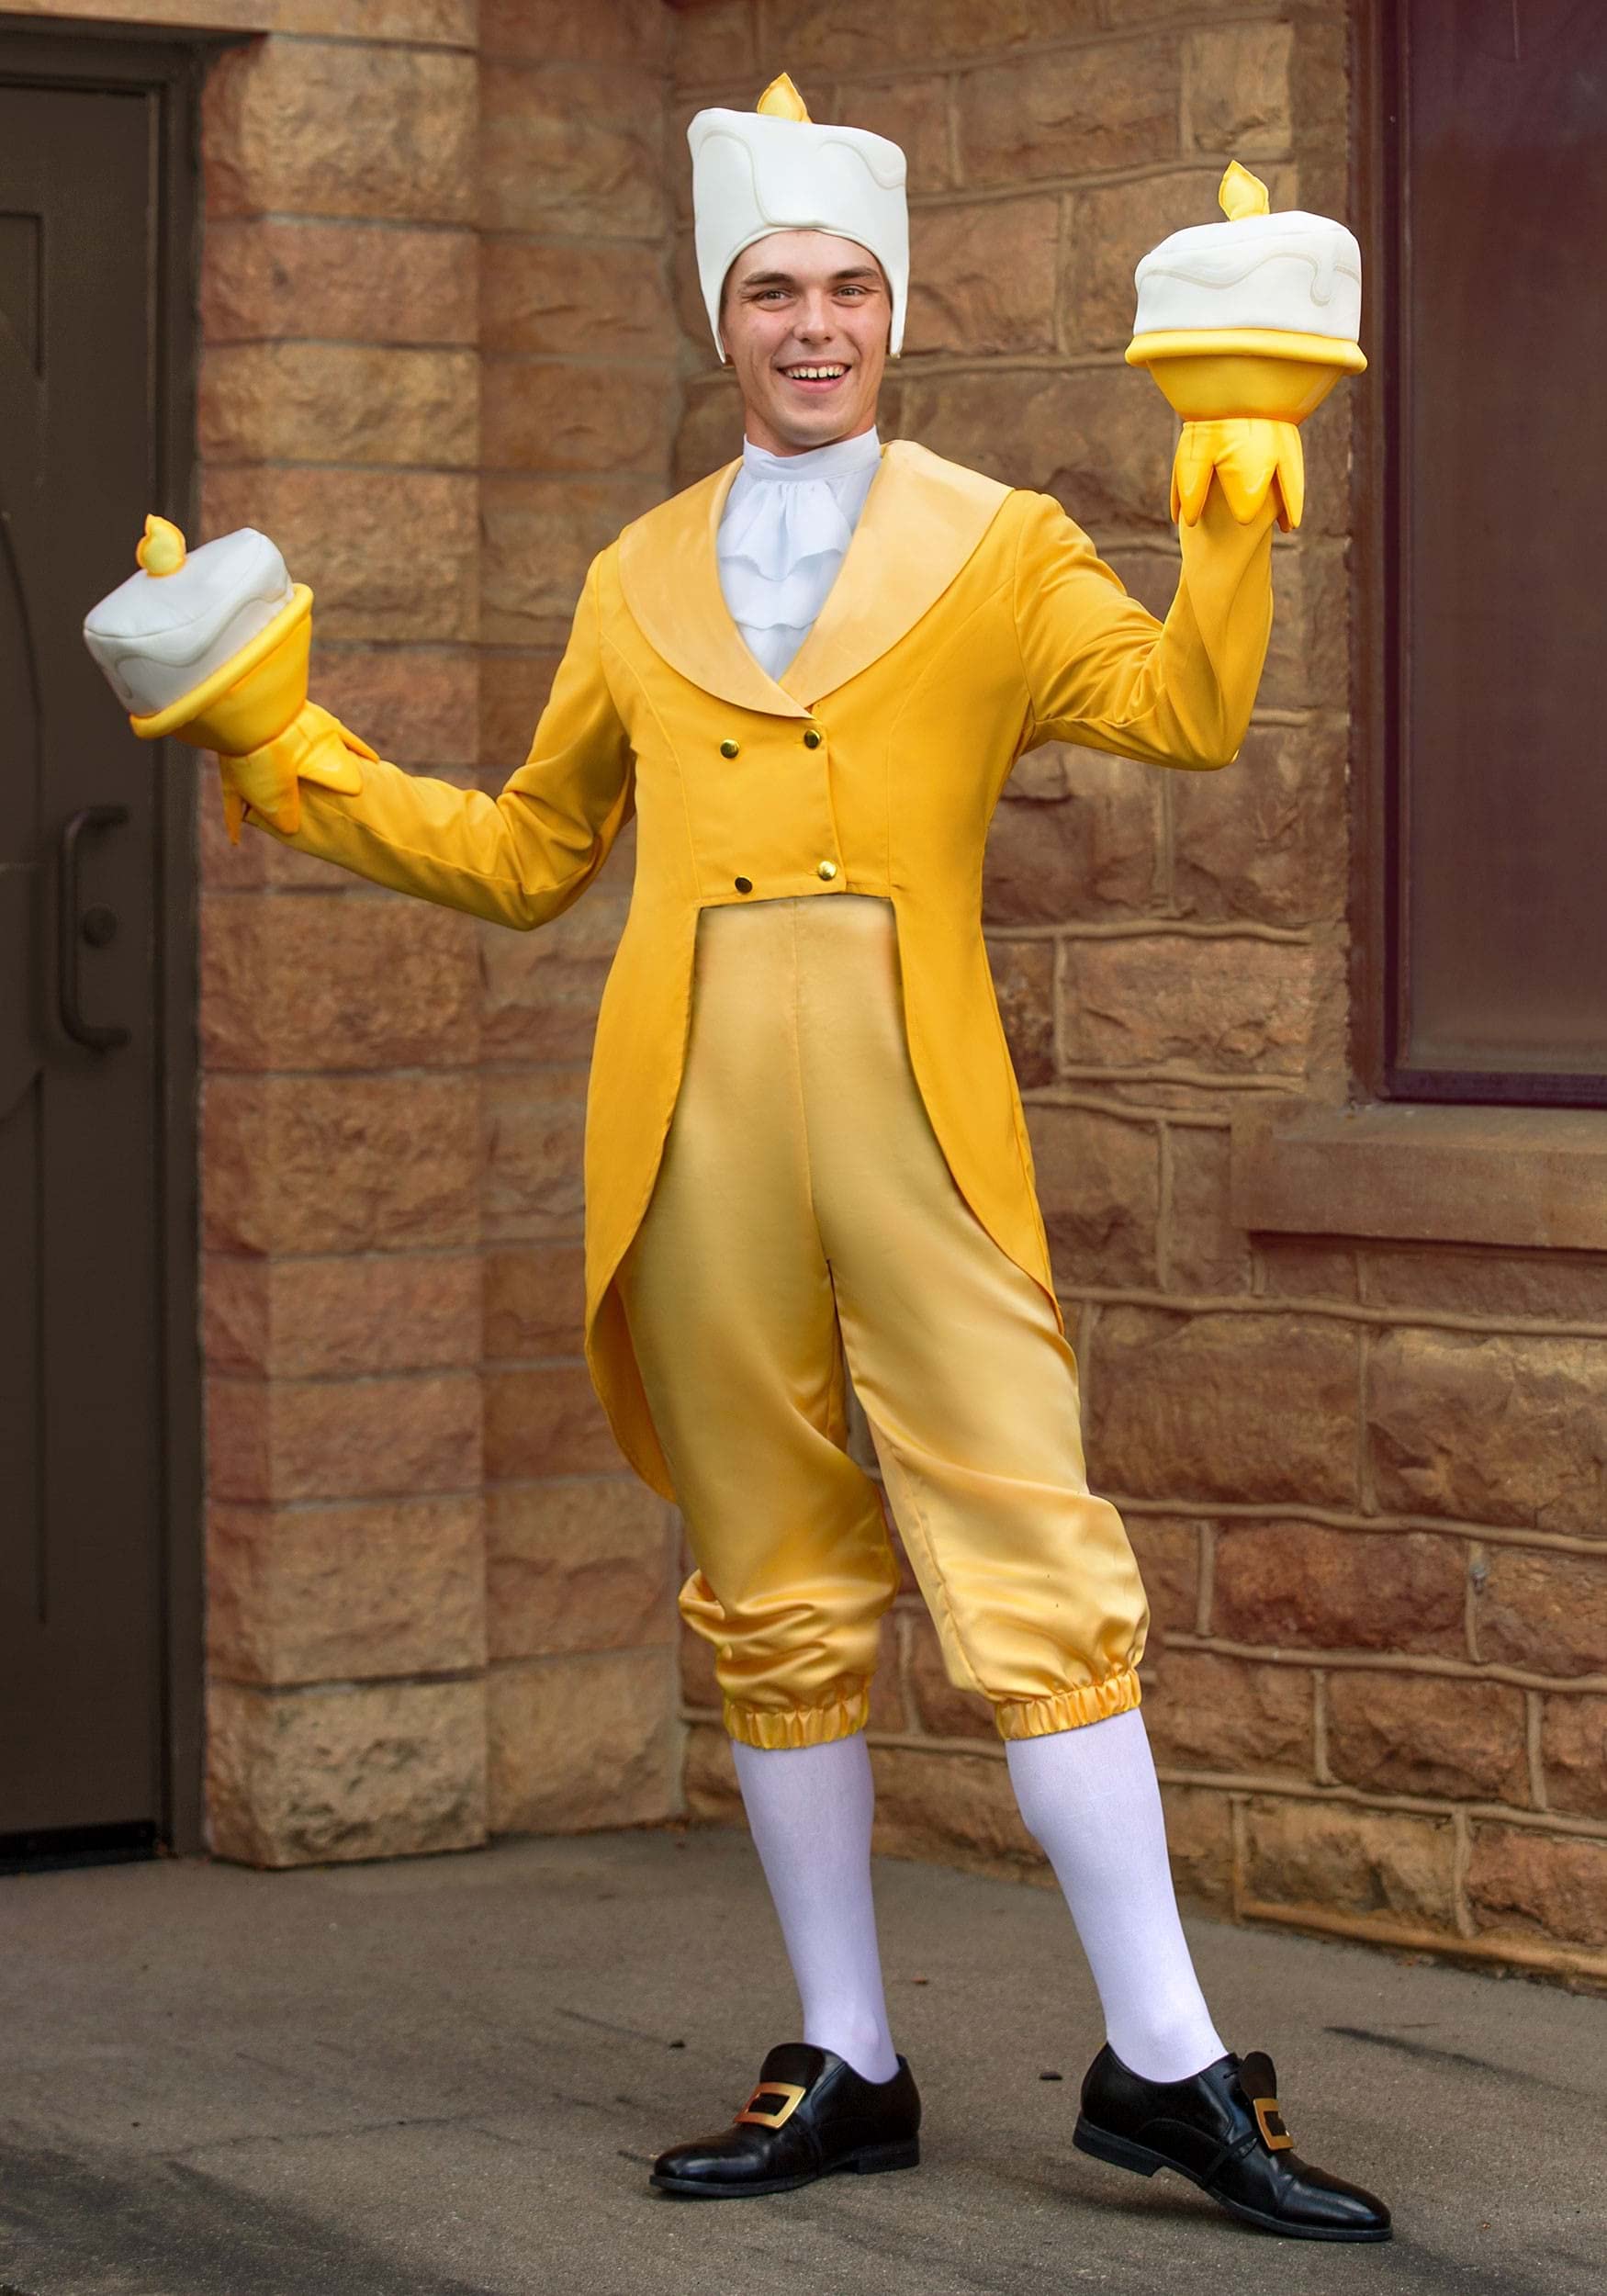 Fun Costumes Disneys Beauty and the Beast Lumiere Costume for Men, Be Our Guest Candlestick Charmer Outfit Medium